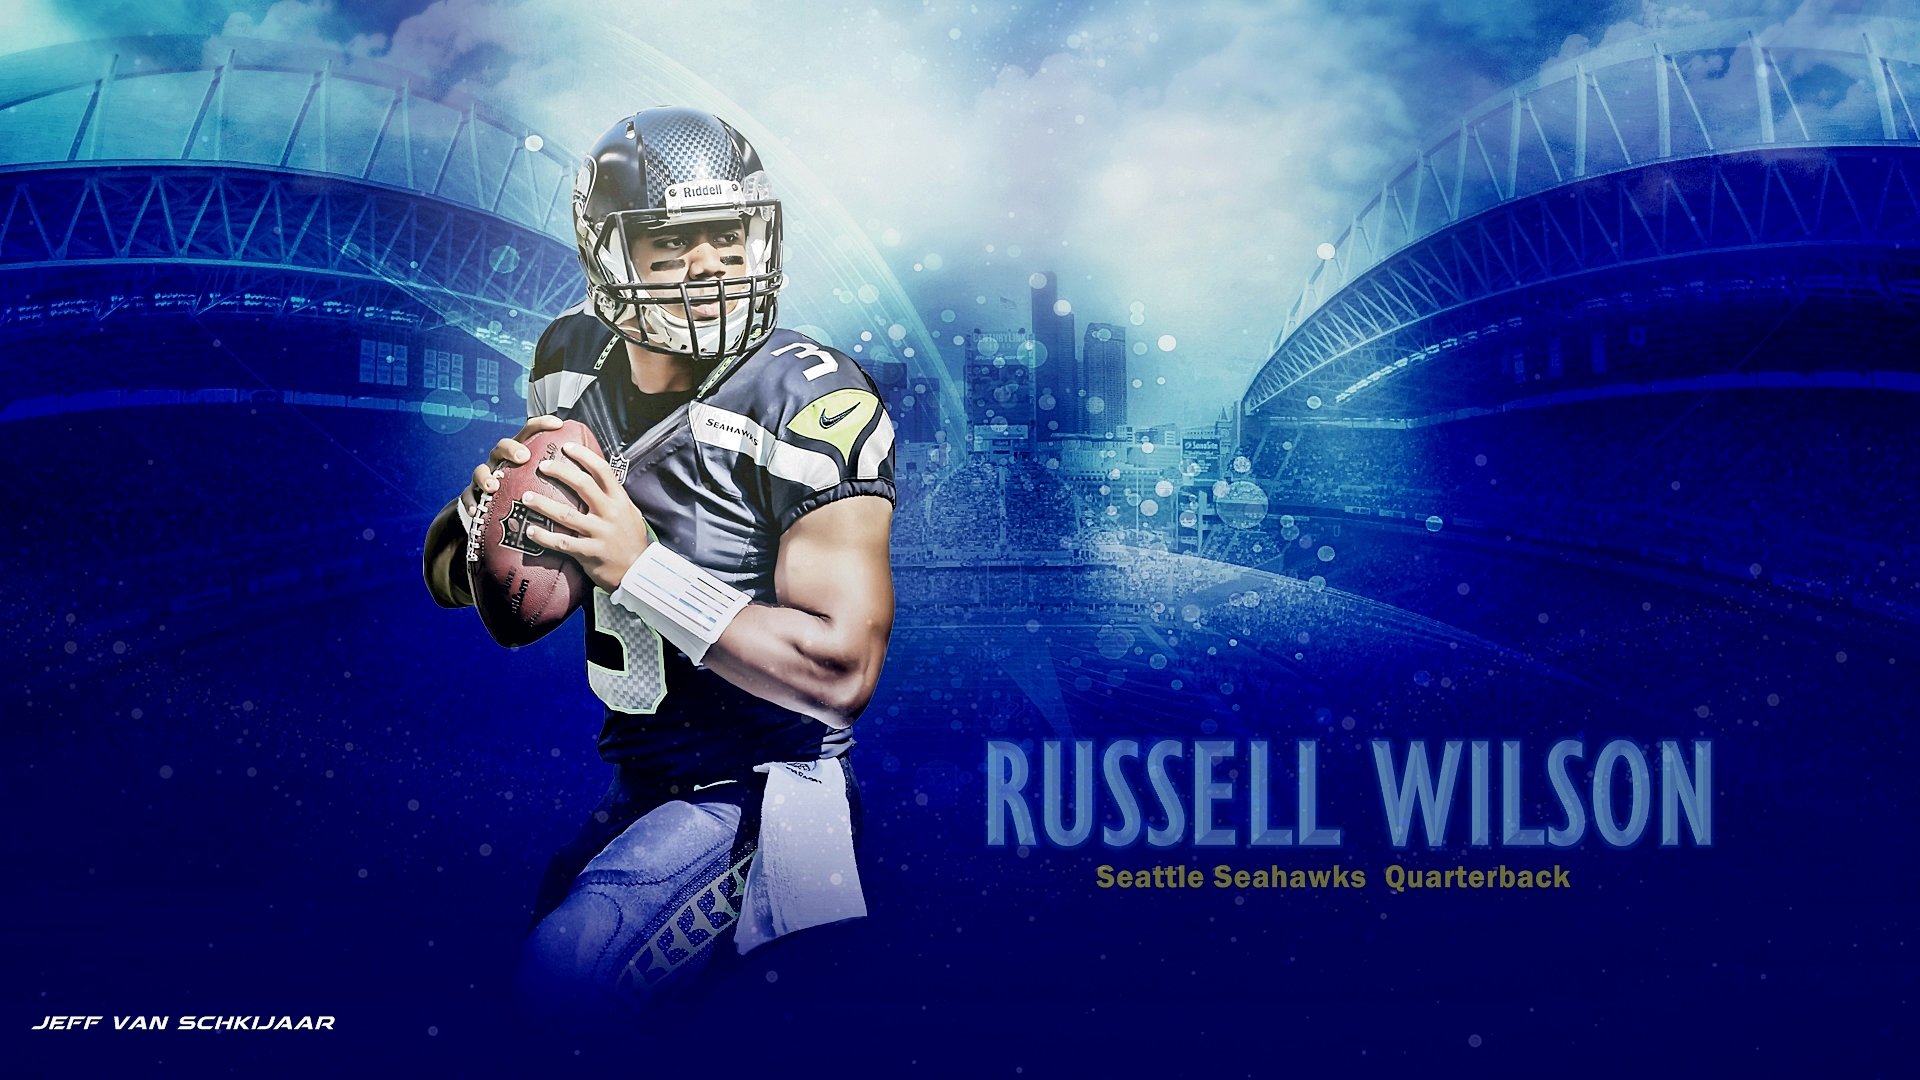 Free Seattle Seahawks High Quality Wallpaper Id - Seattle Seahawks Wallpaper 2018 - HD Wallpaper 